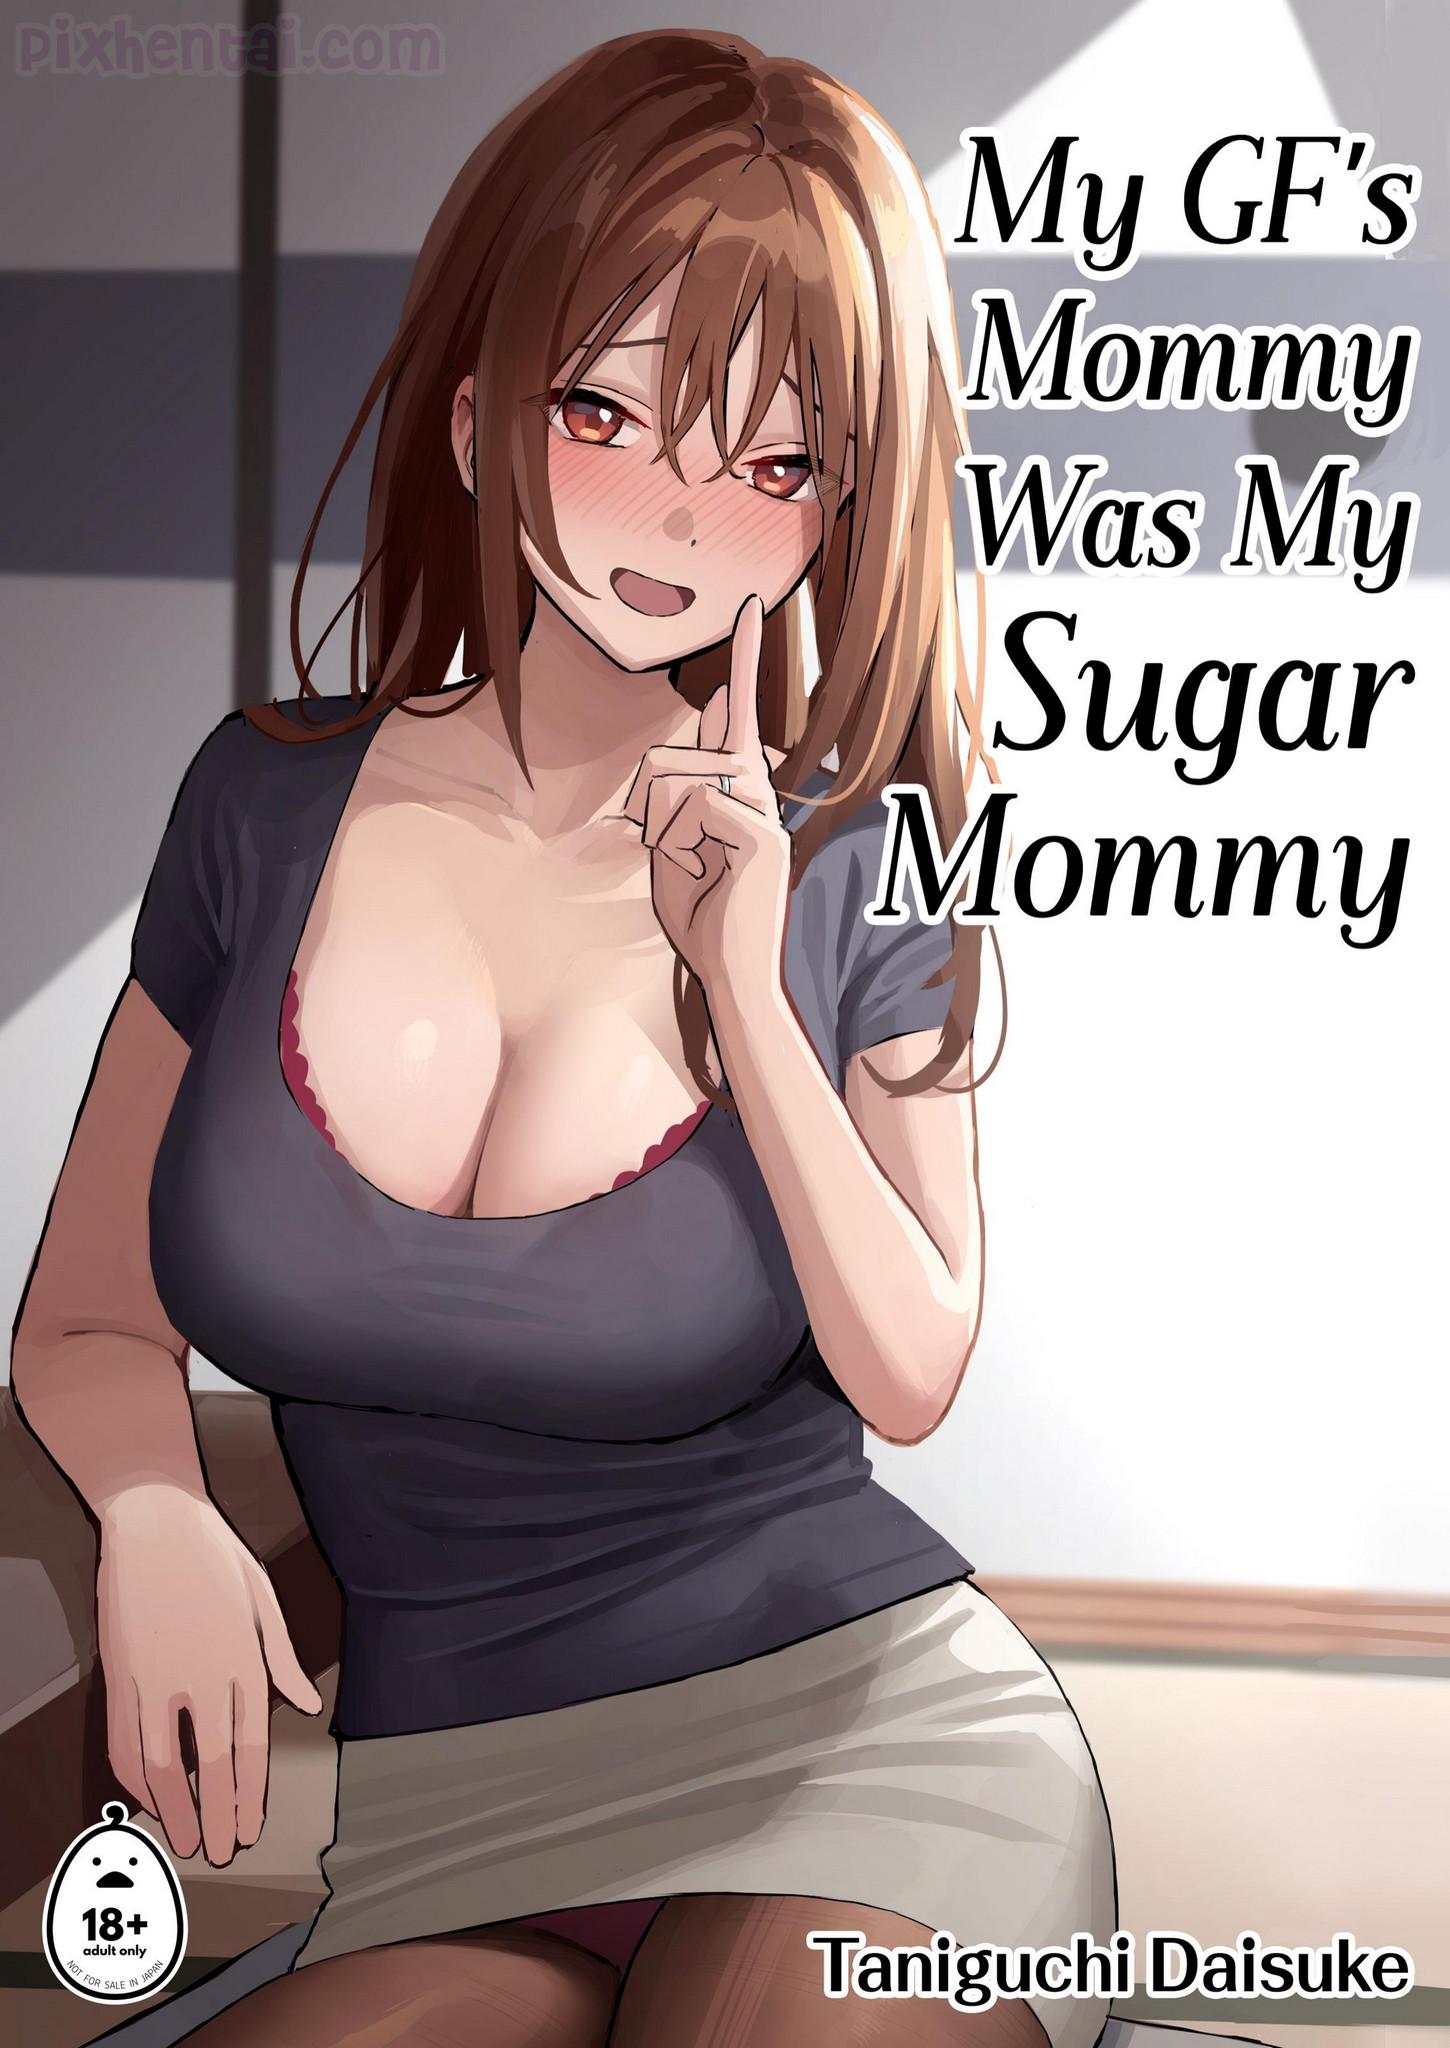 You are currently viewing My GF’s Mommy Was My Sugar Mommy